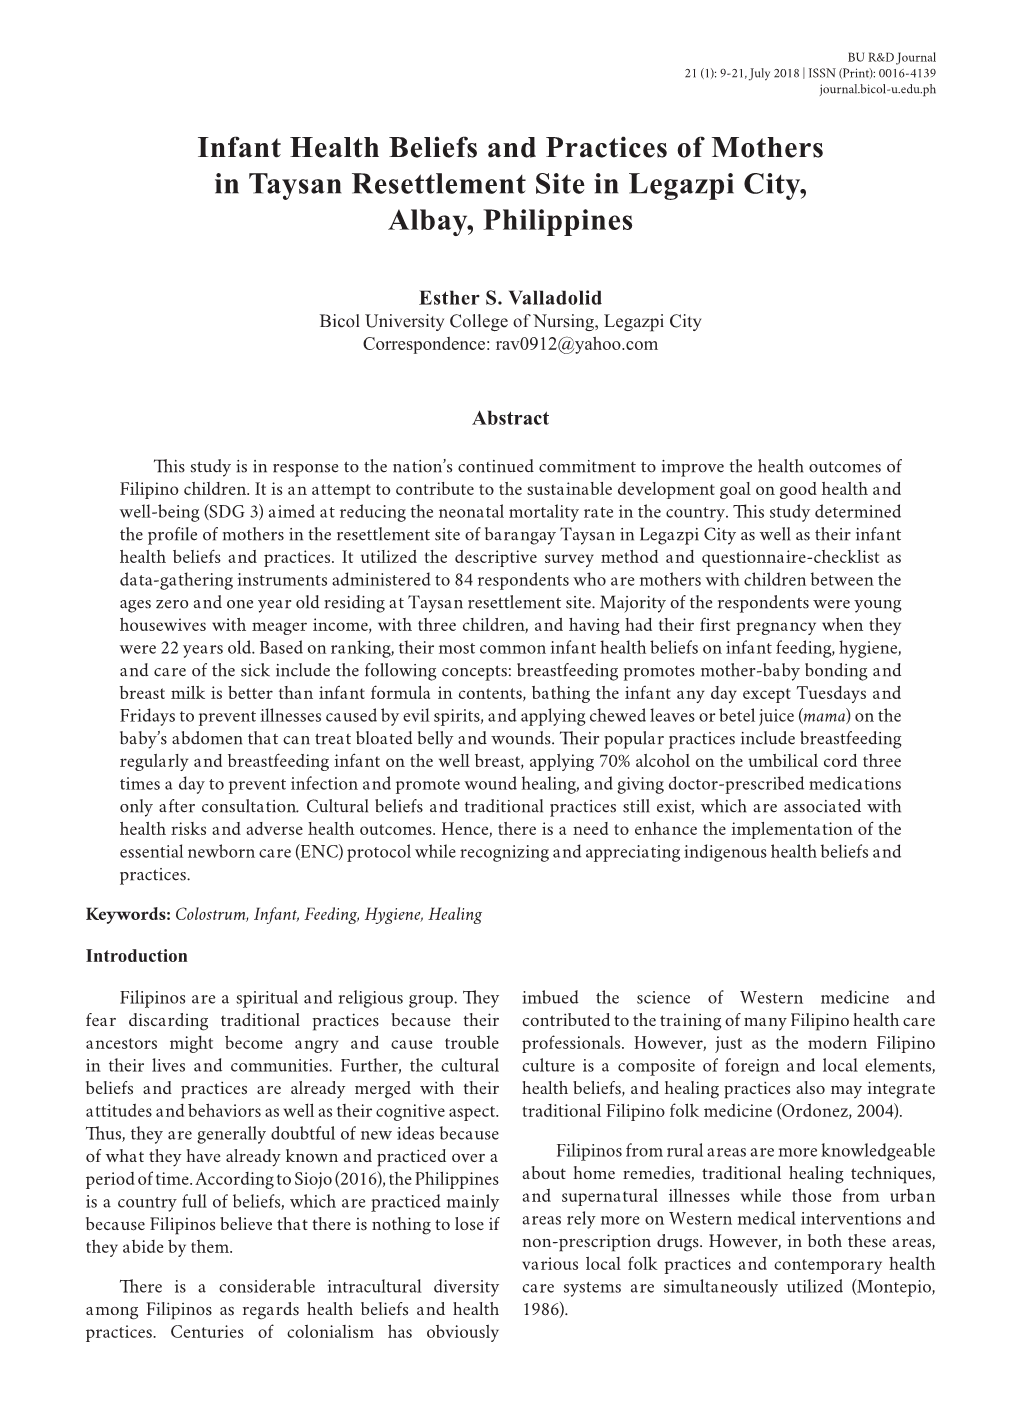 Infant Health Beliefs and Practices of Mothers in Taysan Resettlement Site in Legazpi City, Albay, Philippines